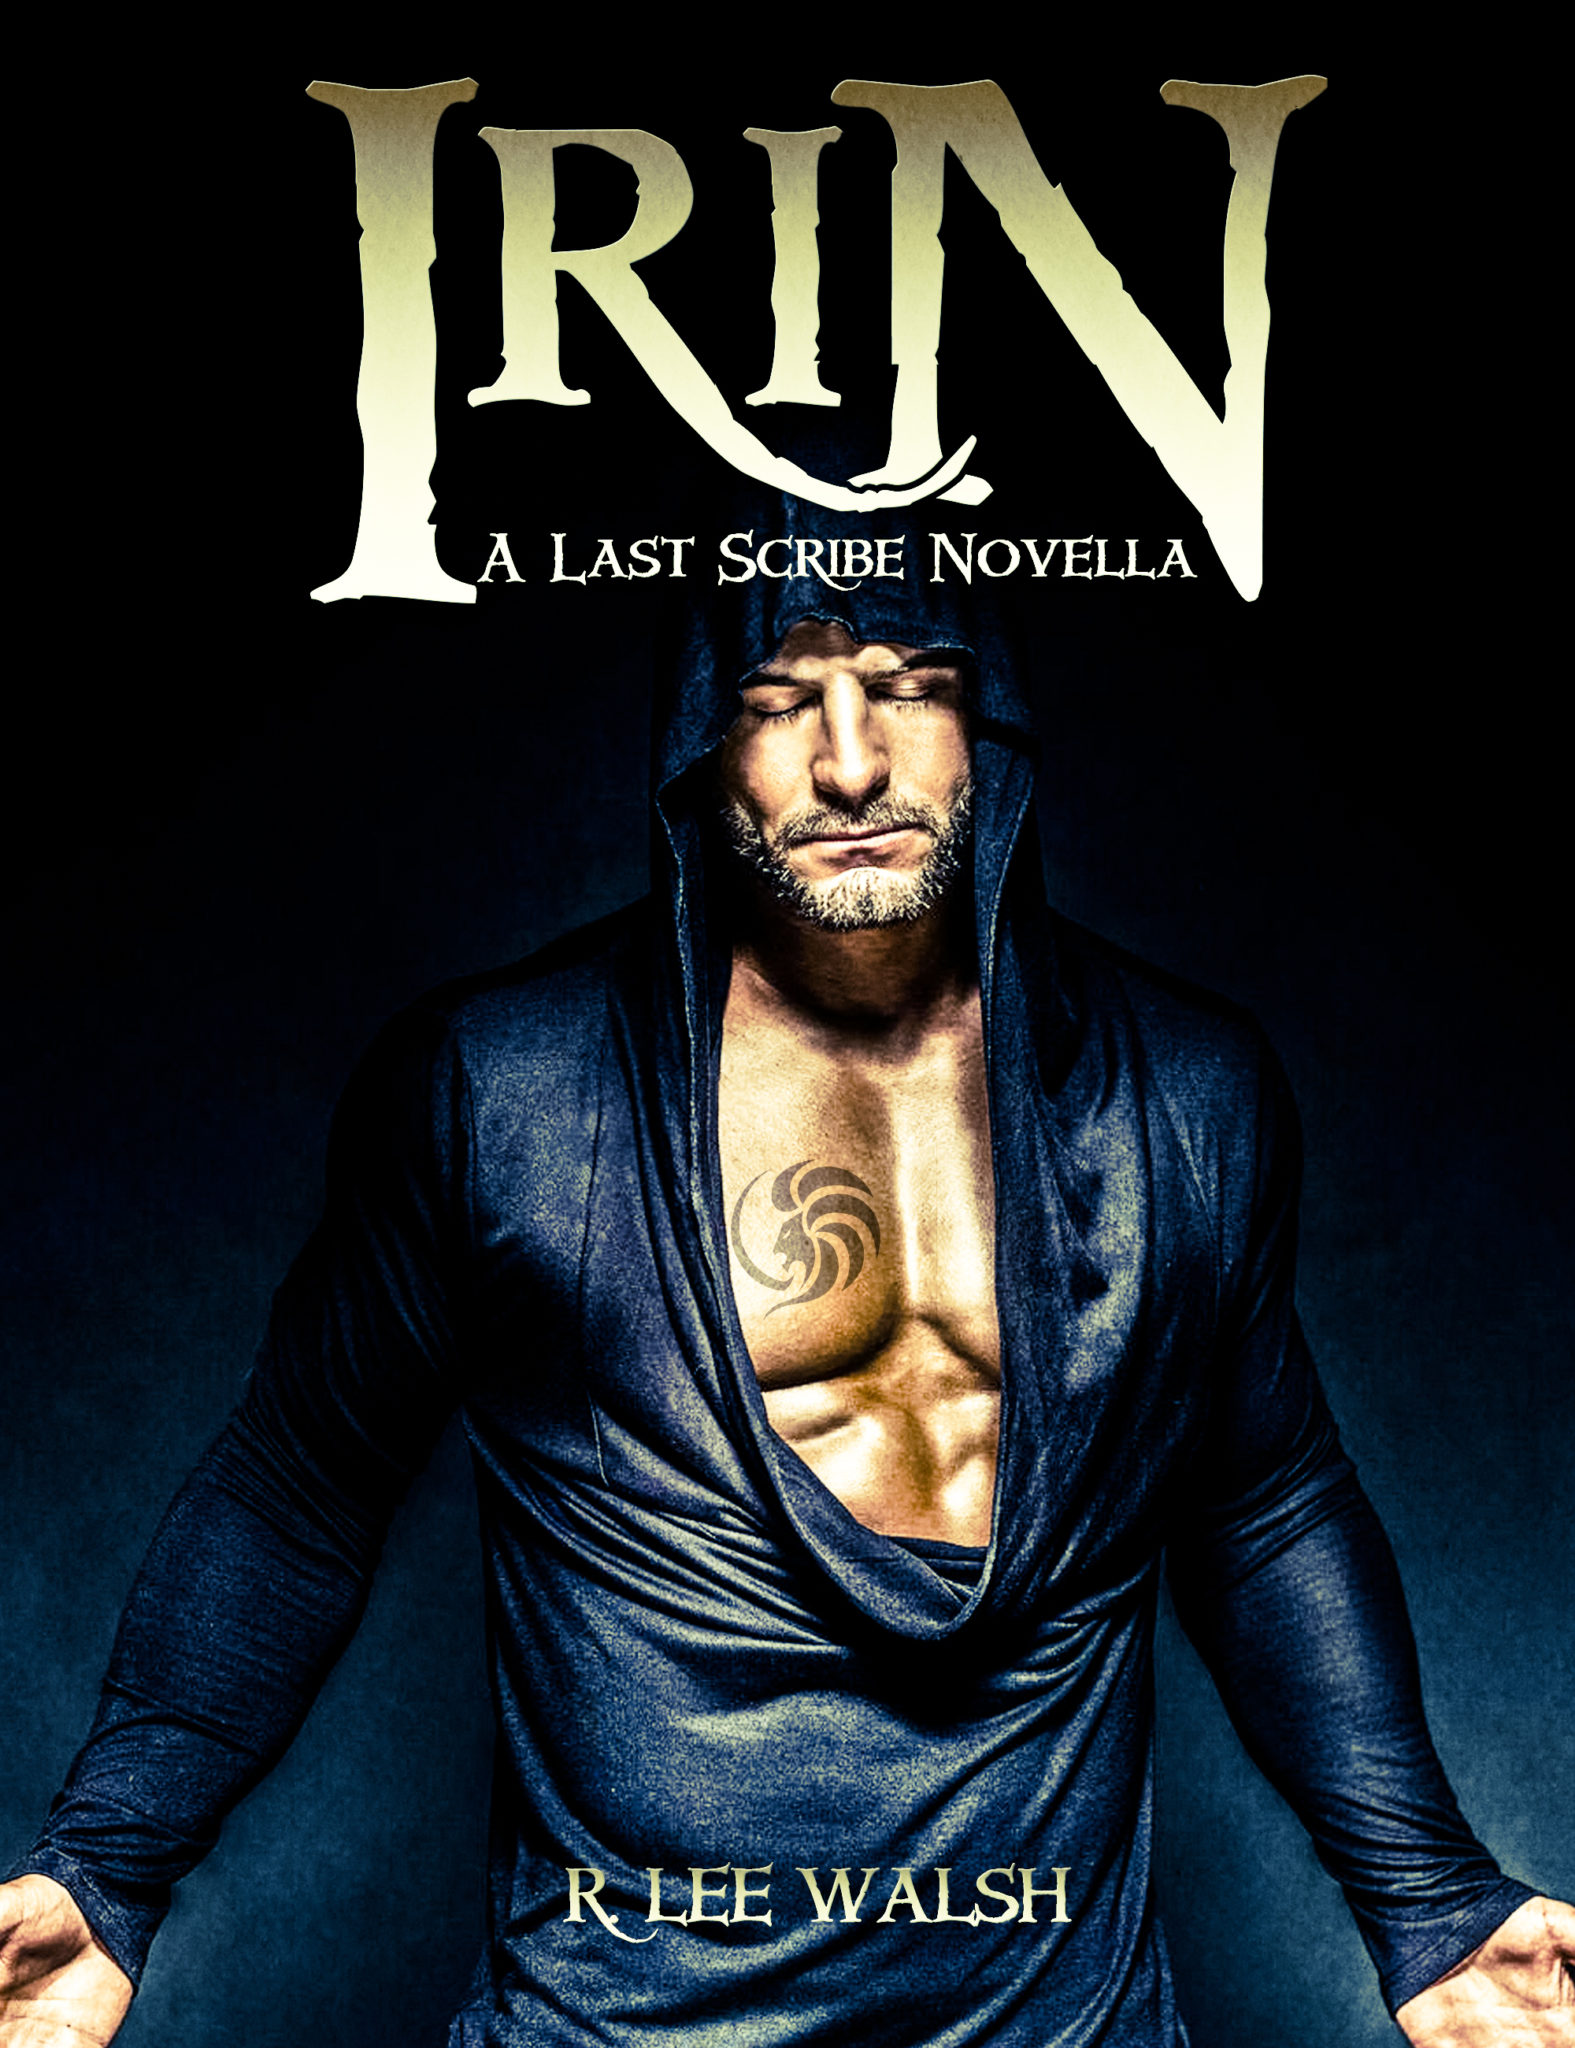 FREE: Irin (The Last Scribe Prequels Book 1) by R. Lee Walsh